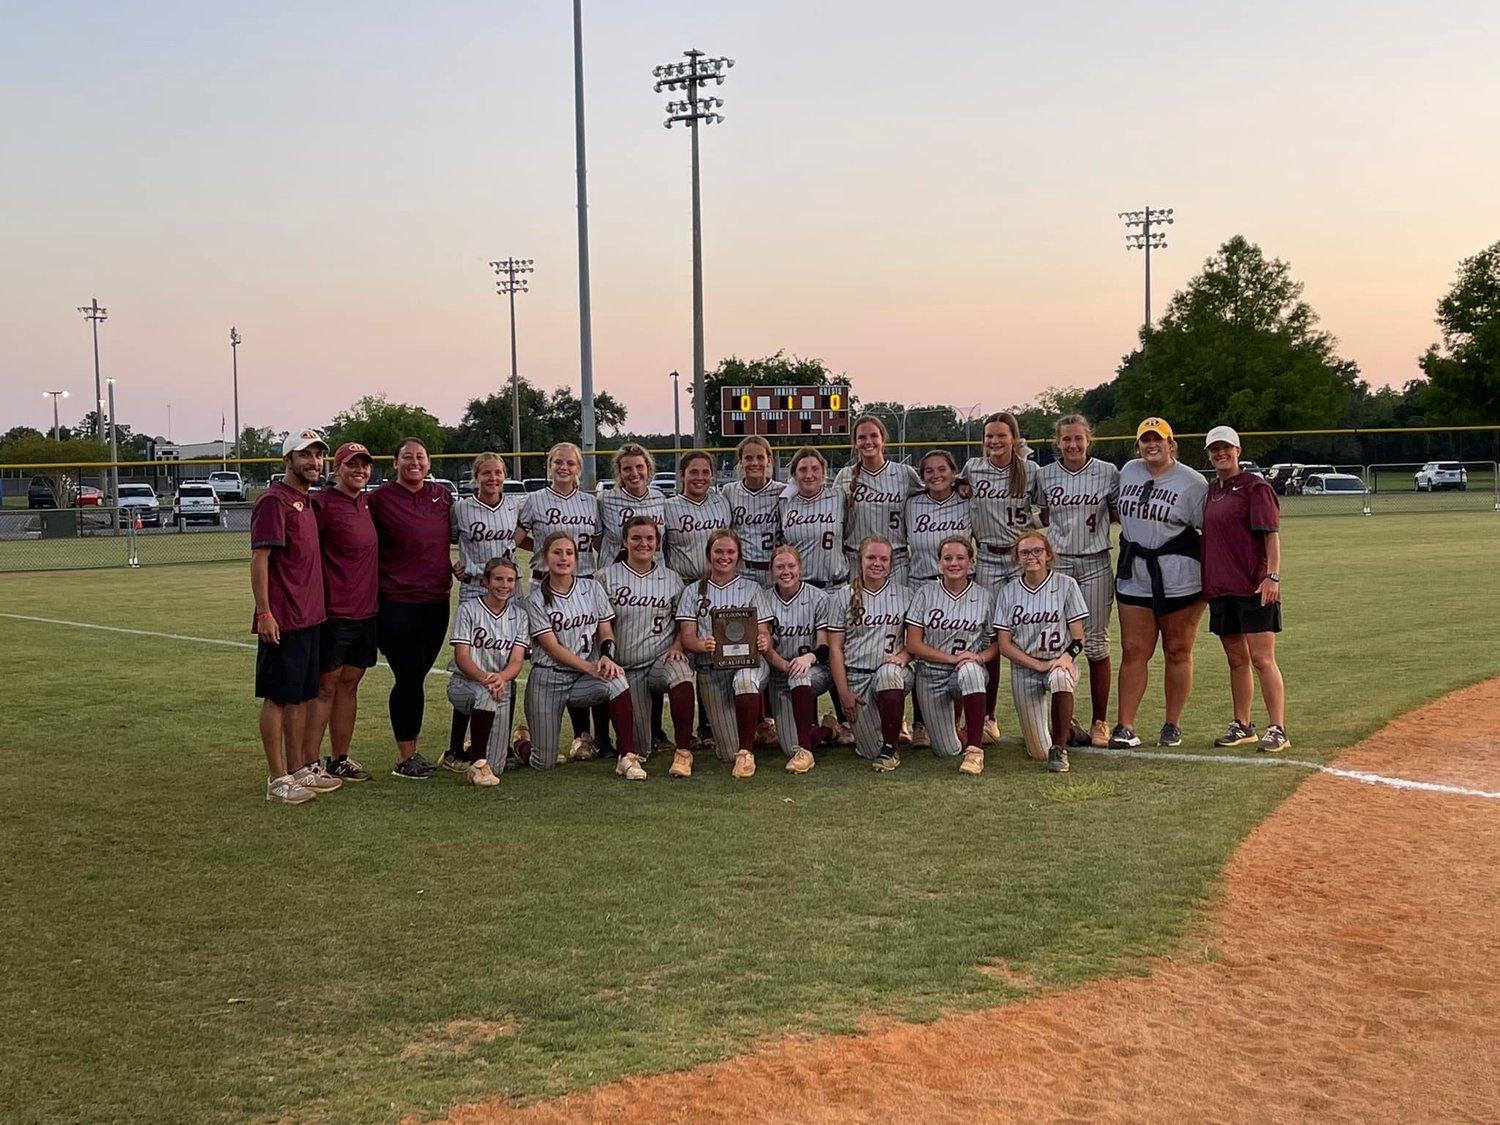 For the first time since 2007, the Robertsdale Golden Bears earned a spot in the state finals after they took second in the Regional Championship last weekend in Gulf Shores.